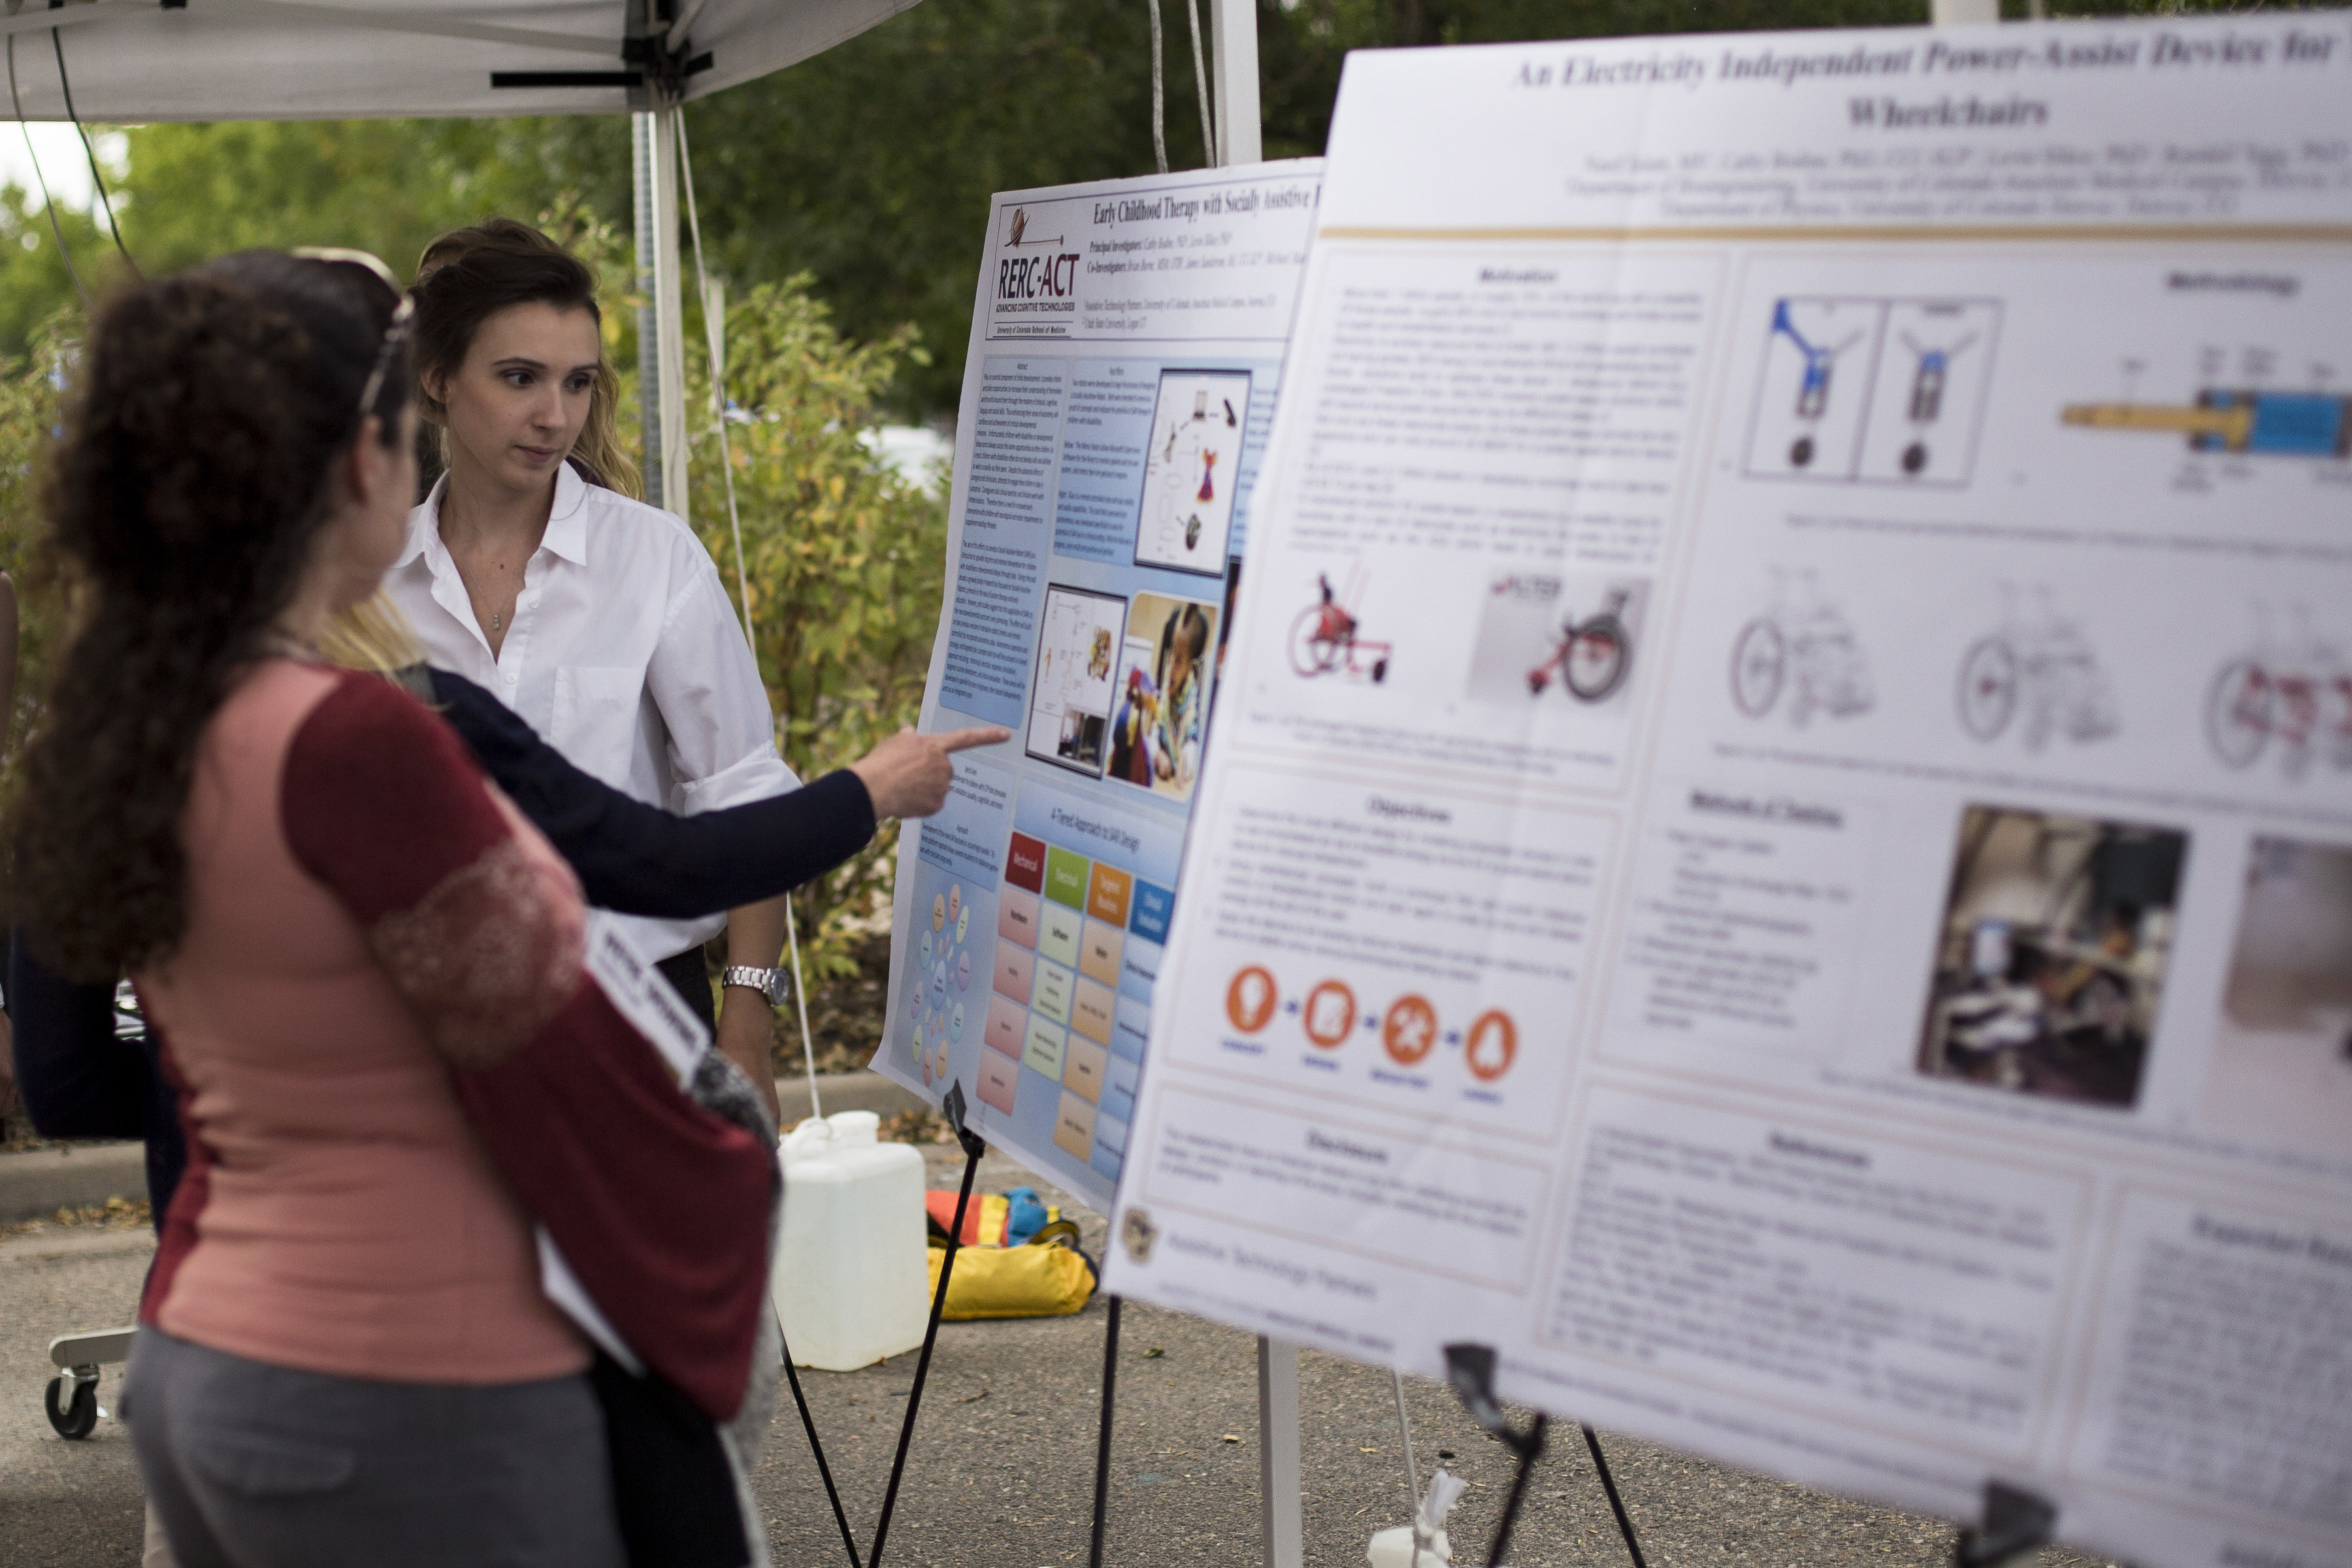 CU bioengineering student presents a poster session